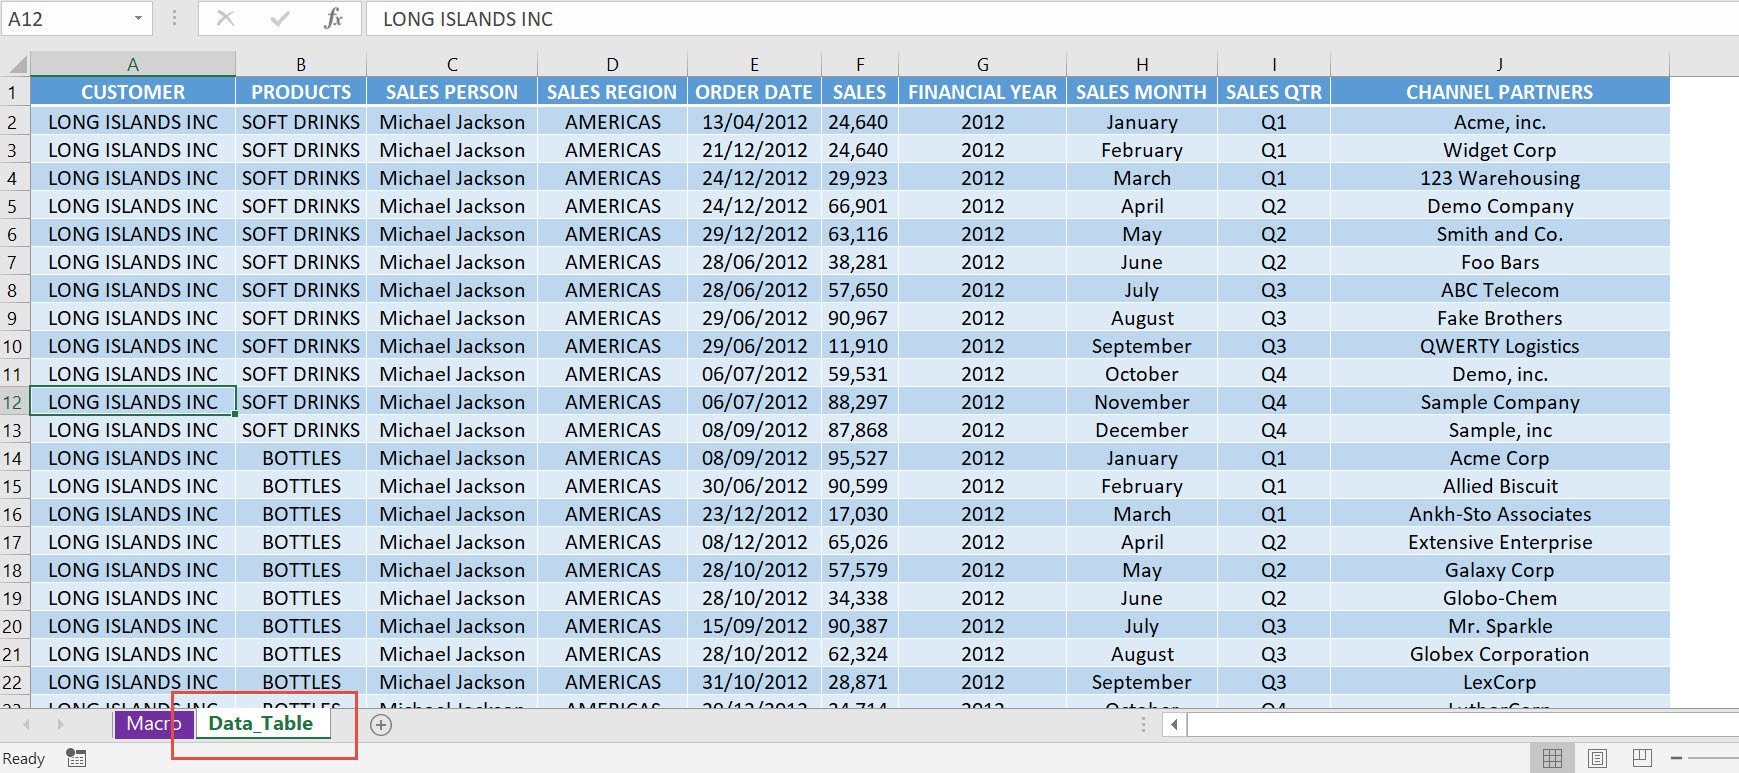 Copy Current Worksheet into a New Workbook Using Macros In Excel